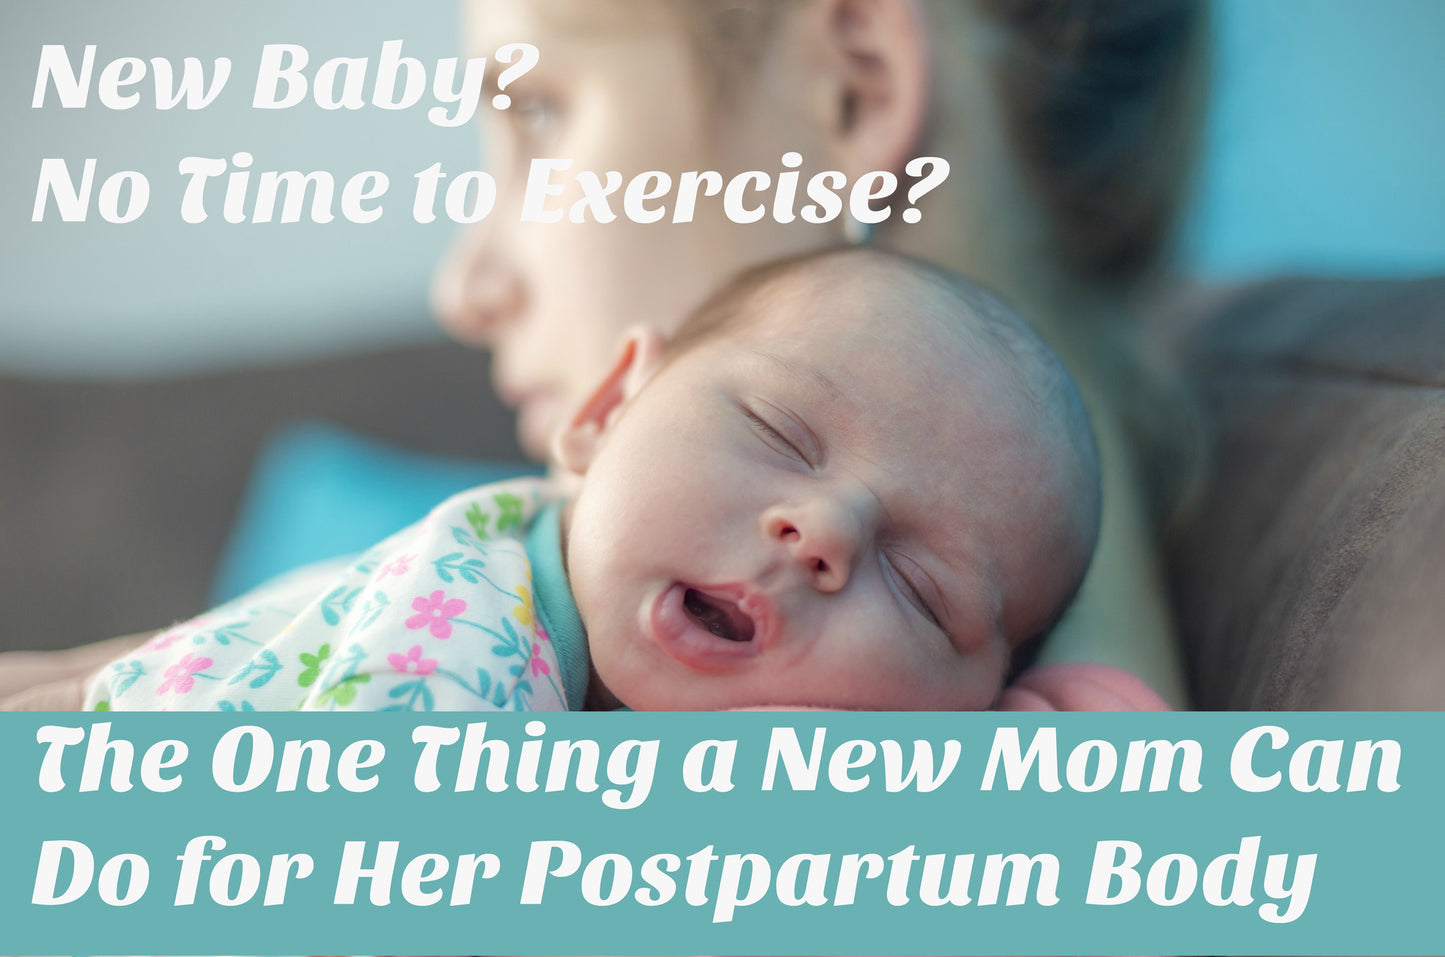 New Baby? No Time to Exercise?  The One Thing a New Mom can do for her Postpartum Body